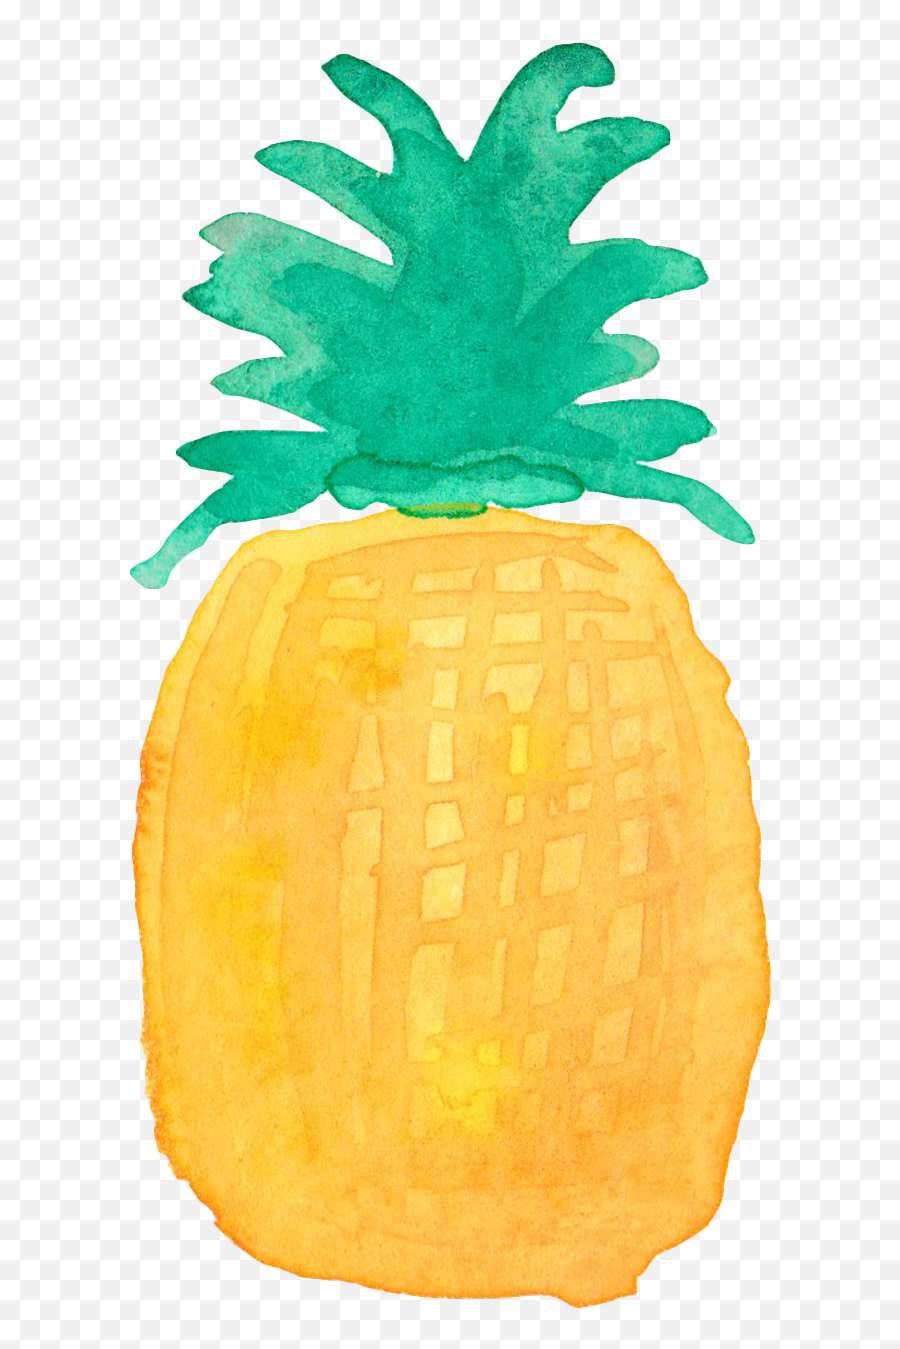 Download Pineapple Drawing Watercolor Painting - Pineapple Cute Pineapple Images Transparent Emoji,Pineapple Clipart